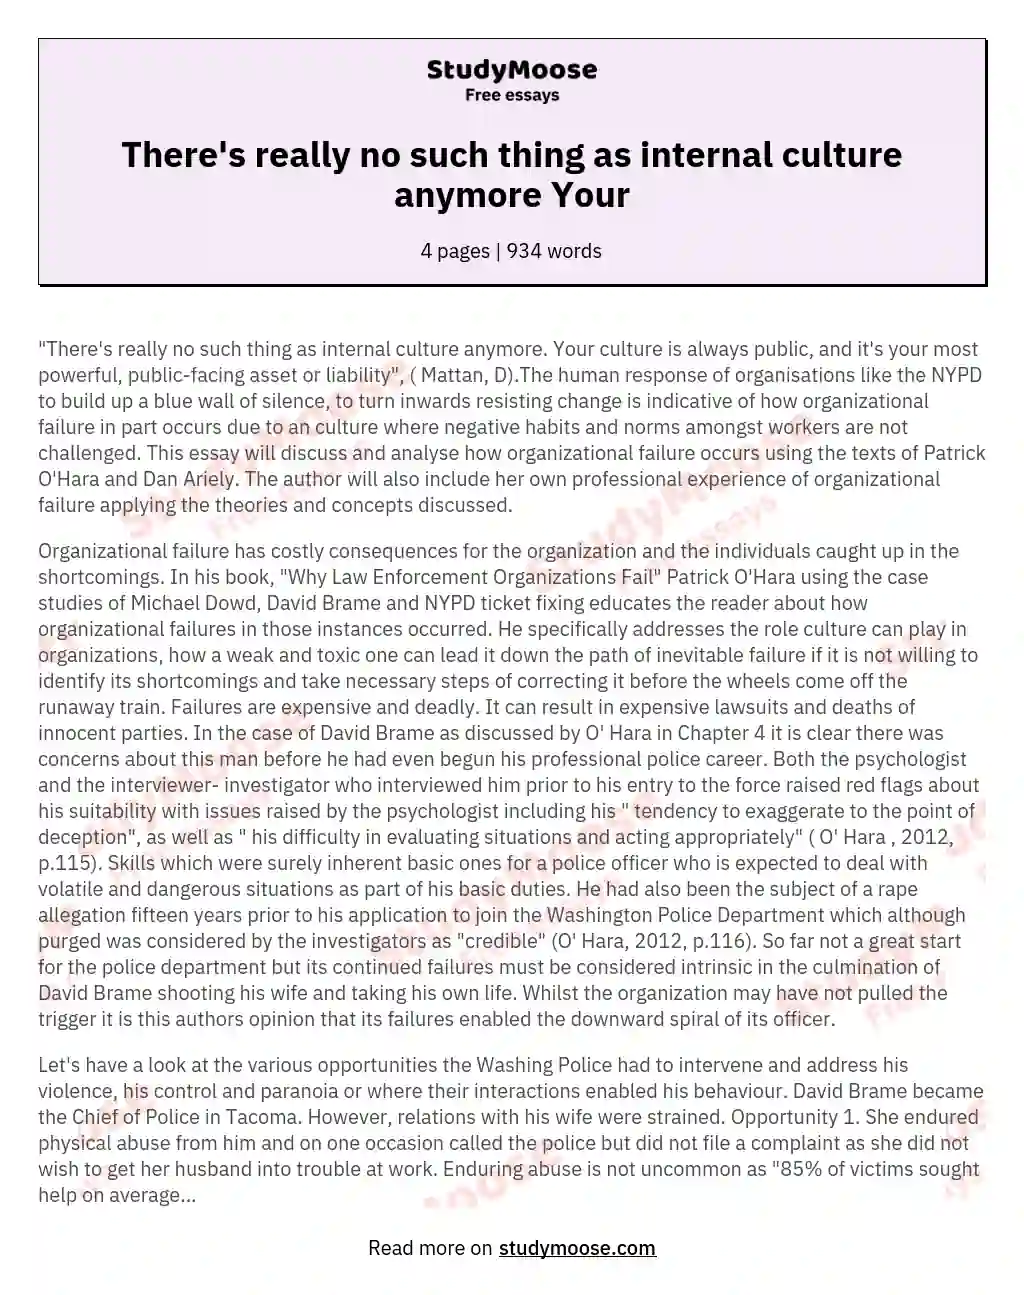 There's really no such thing as internal culture anymore Your essay